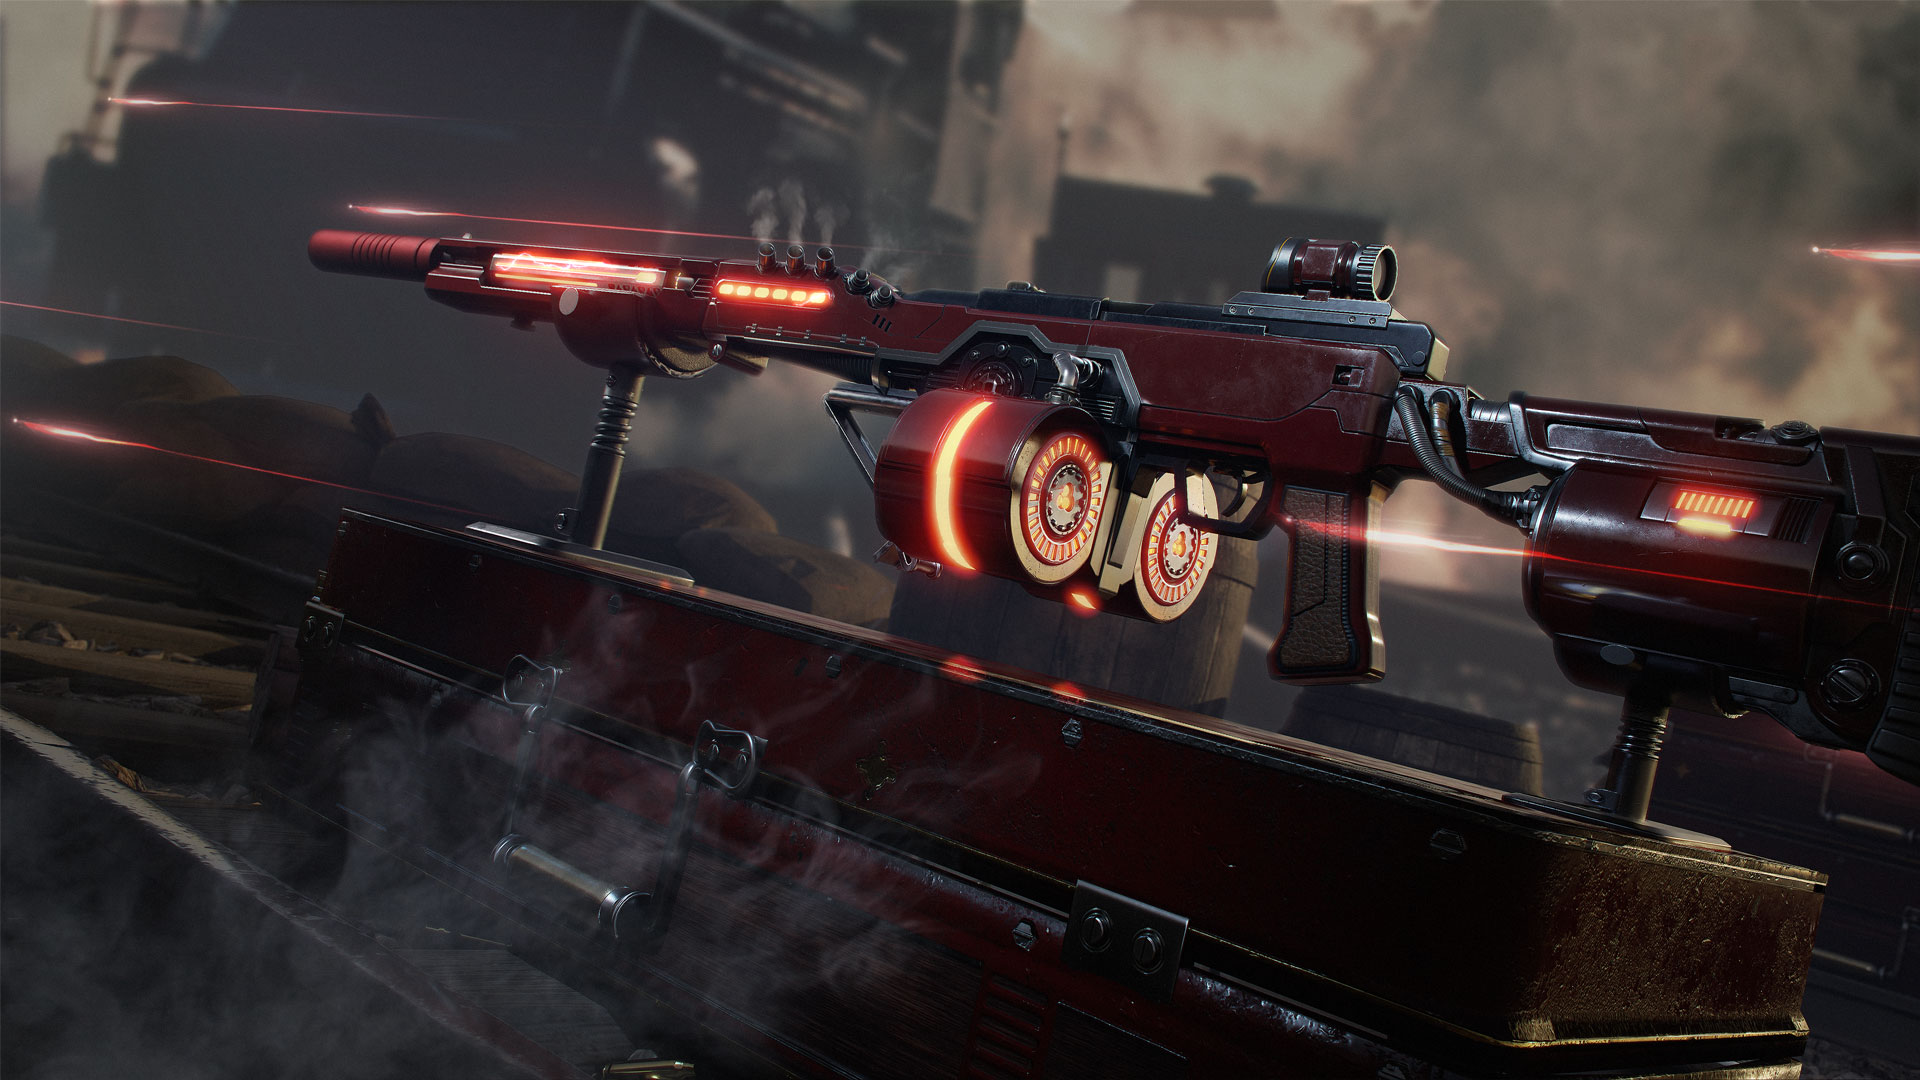 Go thermonuclear with the Red Reactor Mastercraft bundle